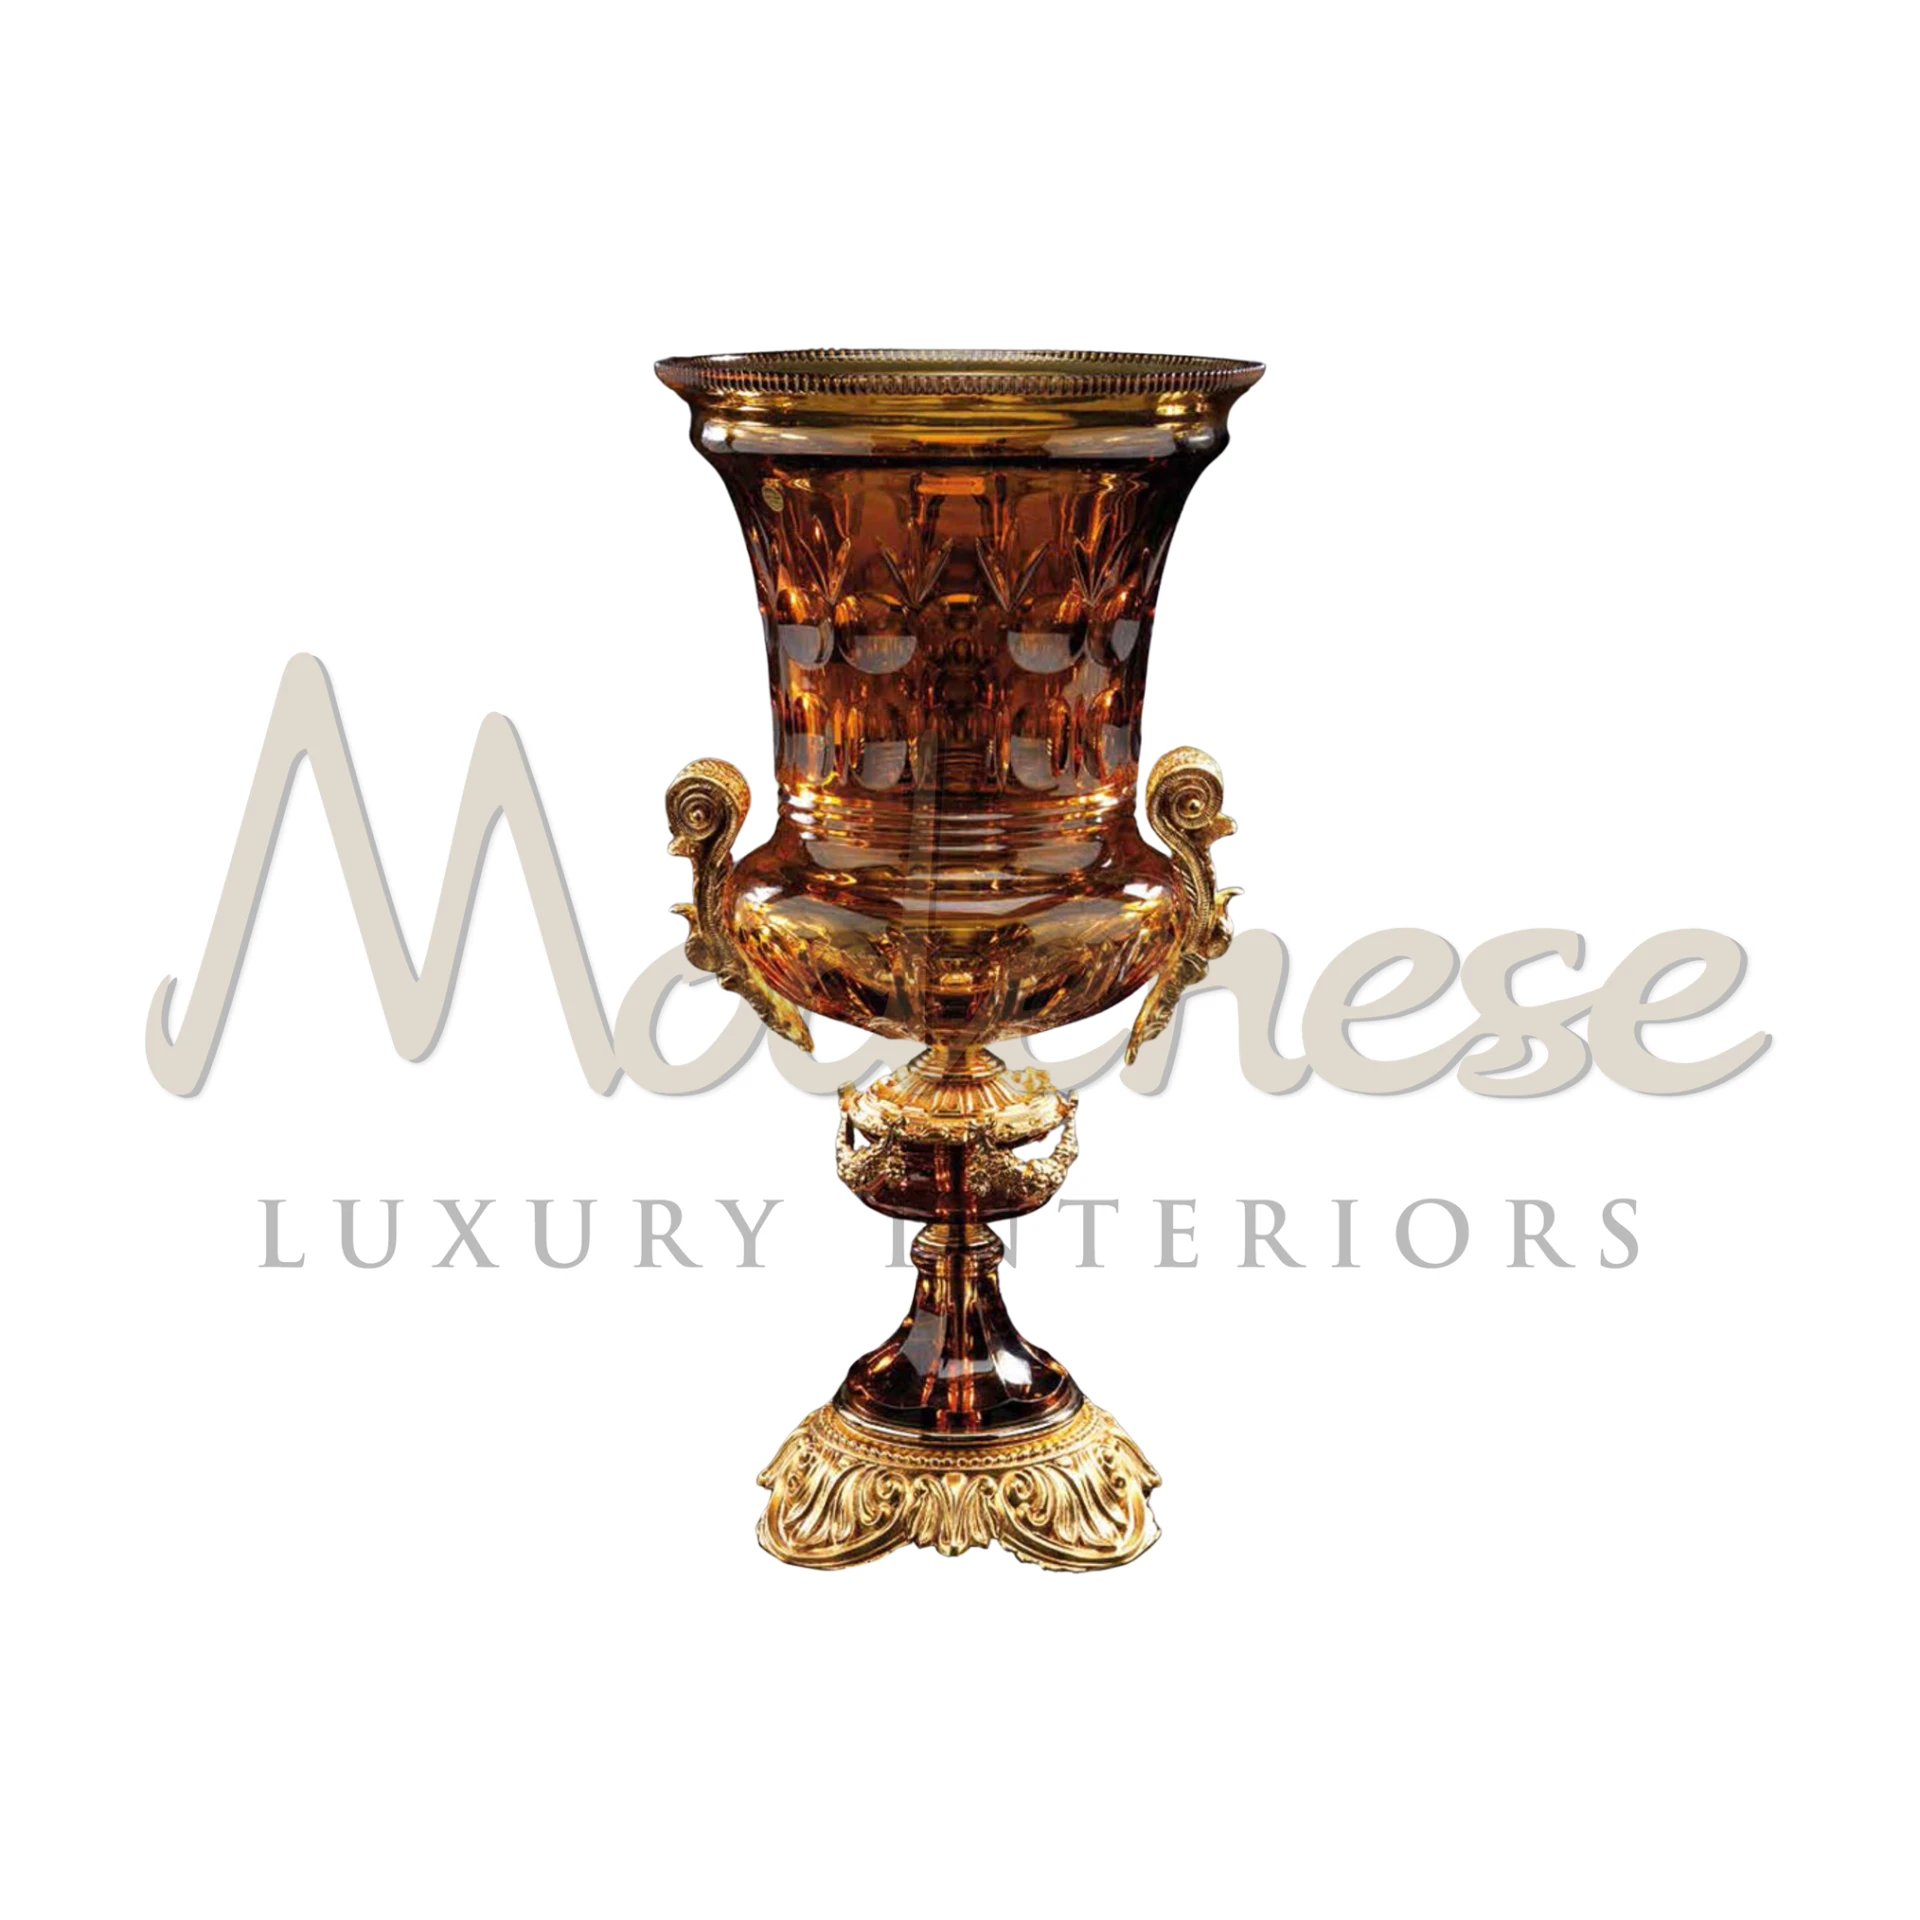 Baroque design luxury vase with intricate curves and scrolls, embodying 17th-century European art in modern decor.